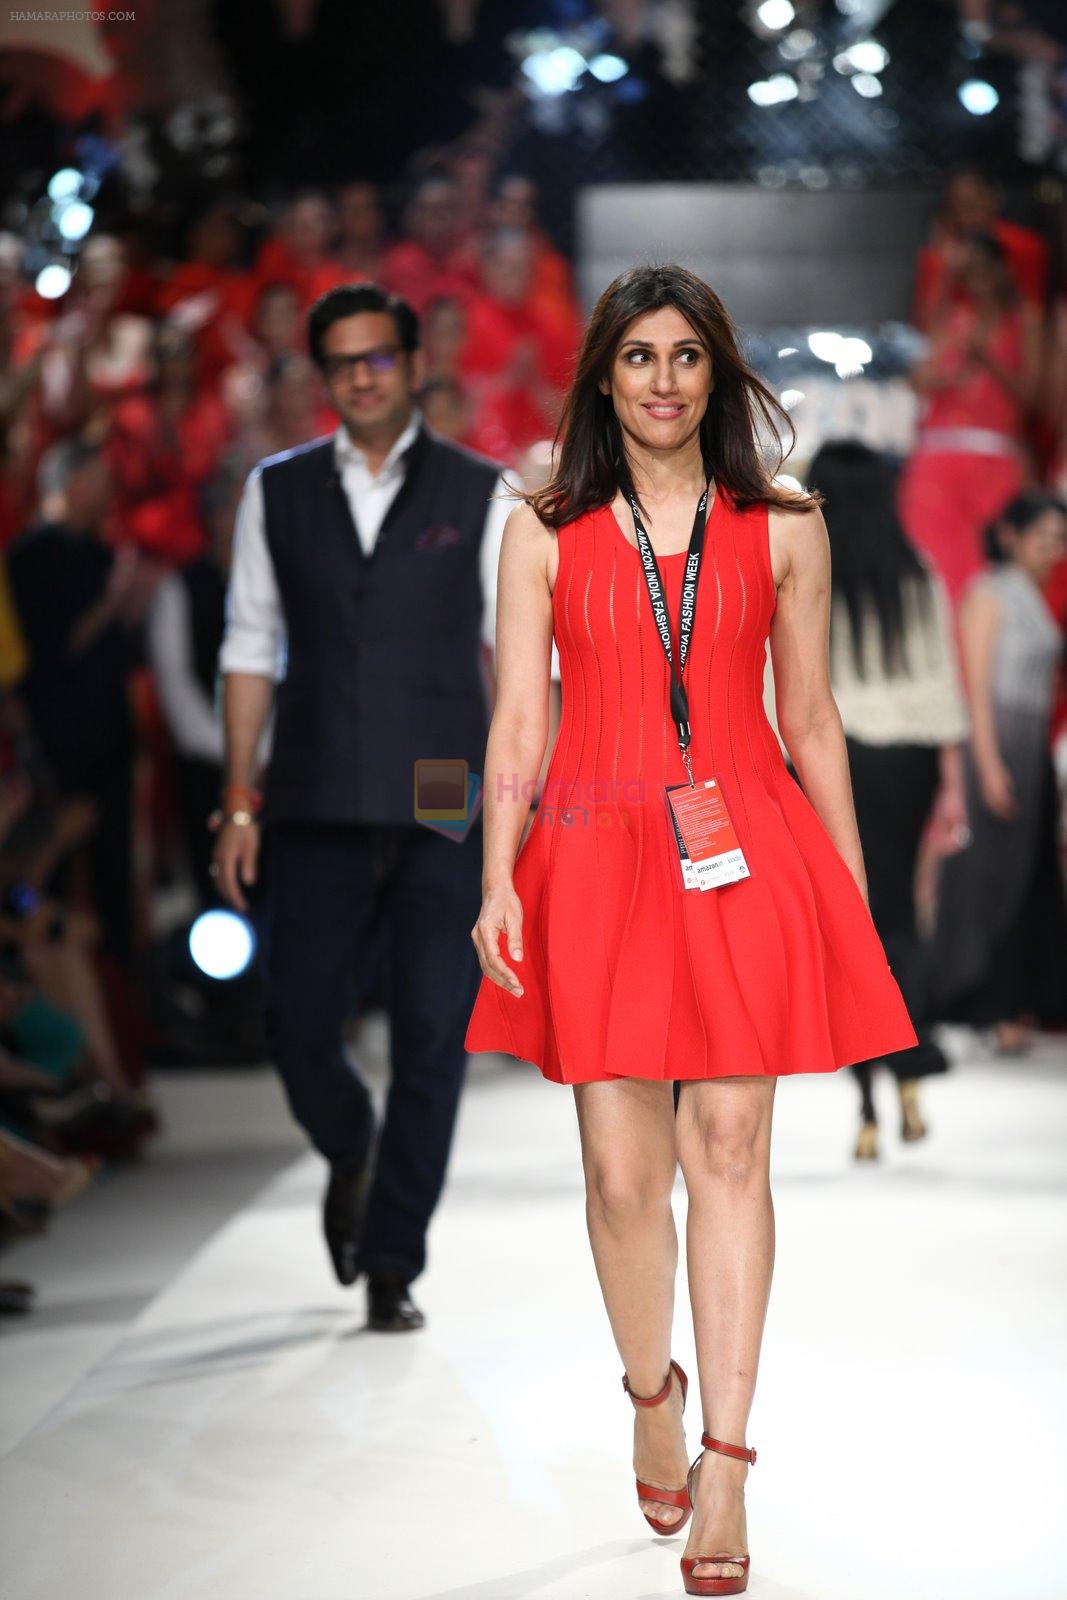 Model walk the ramp for Amazon India Fashion Week Grand Finale on 29th March 2015